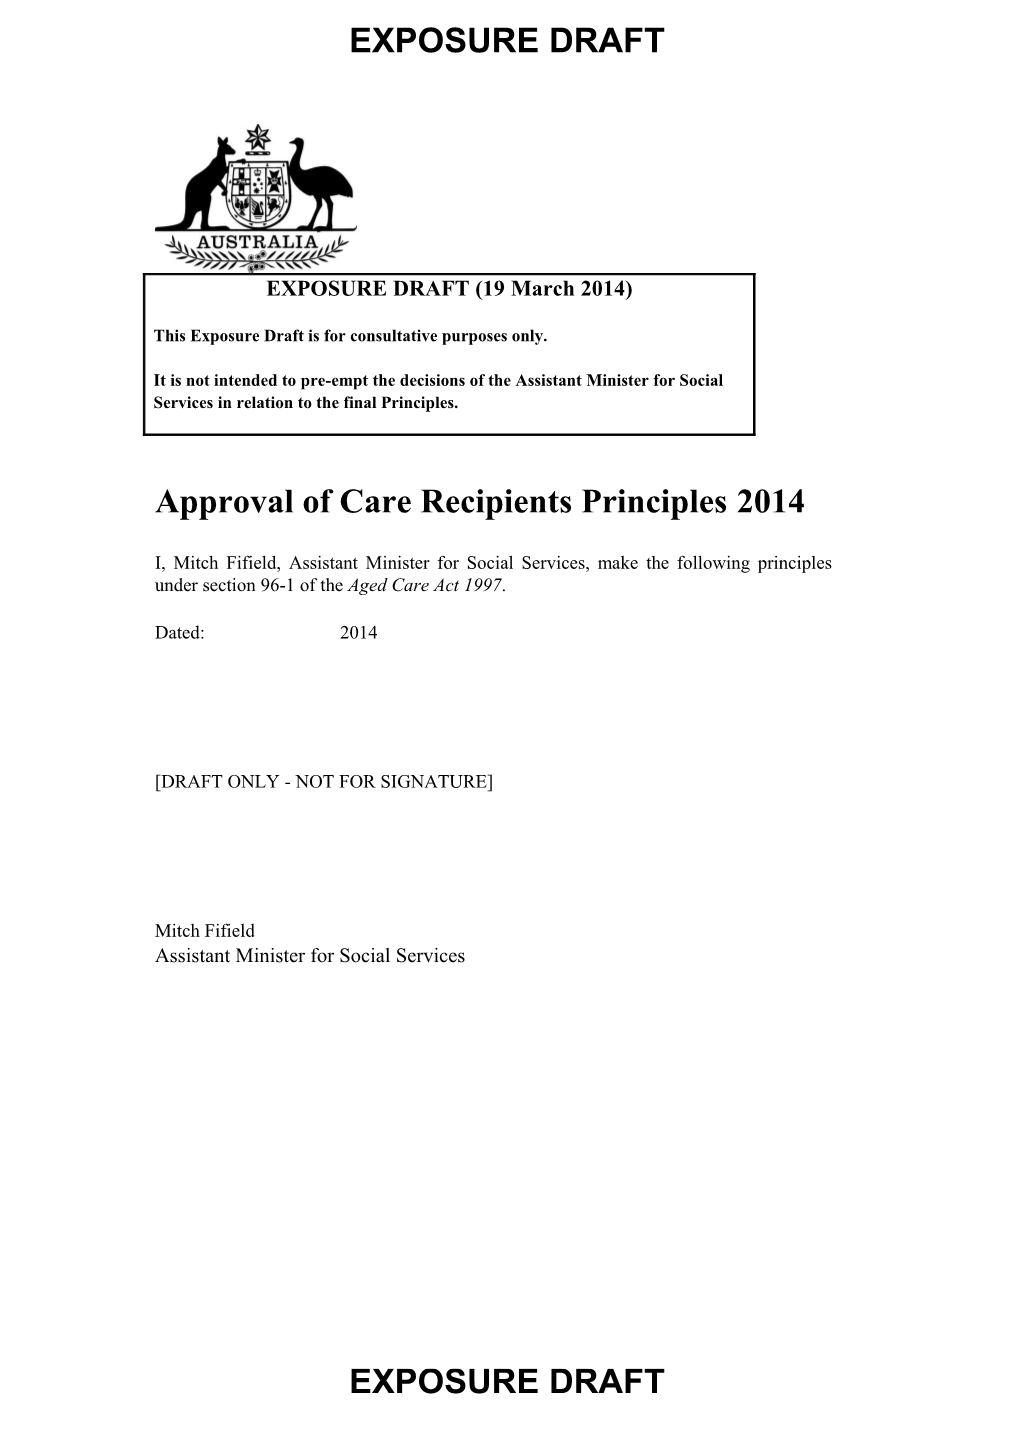 Approval of Care Recipients Principles2014